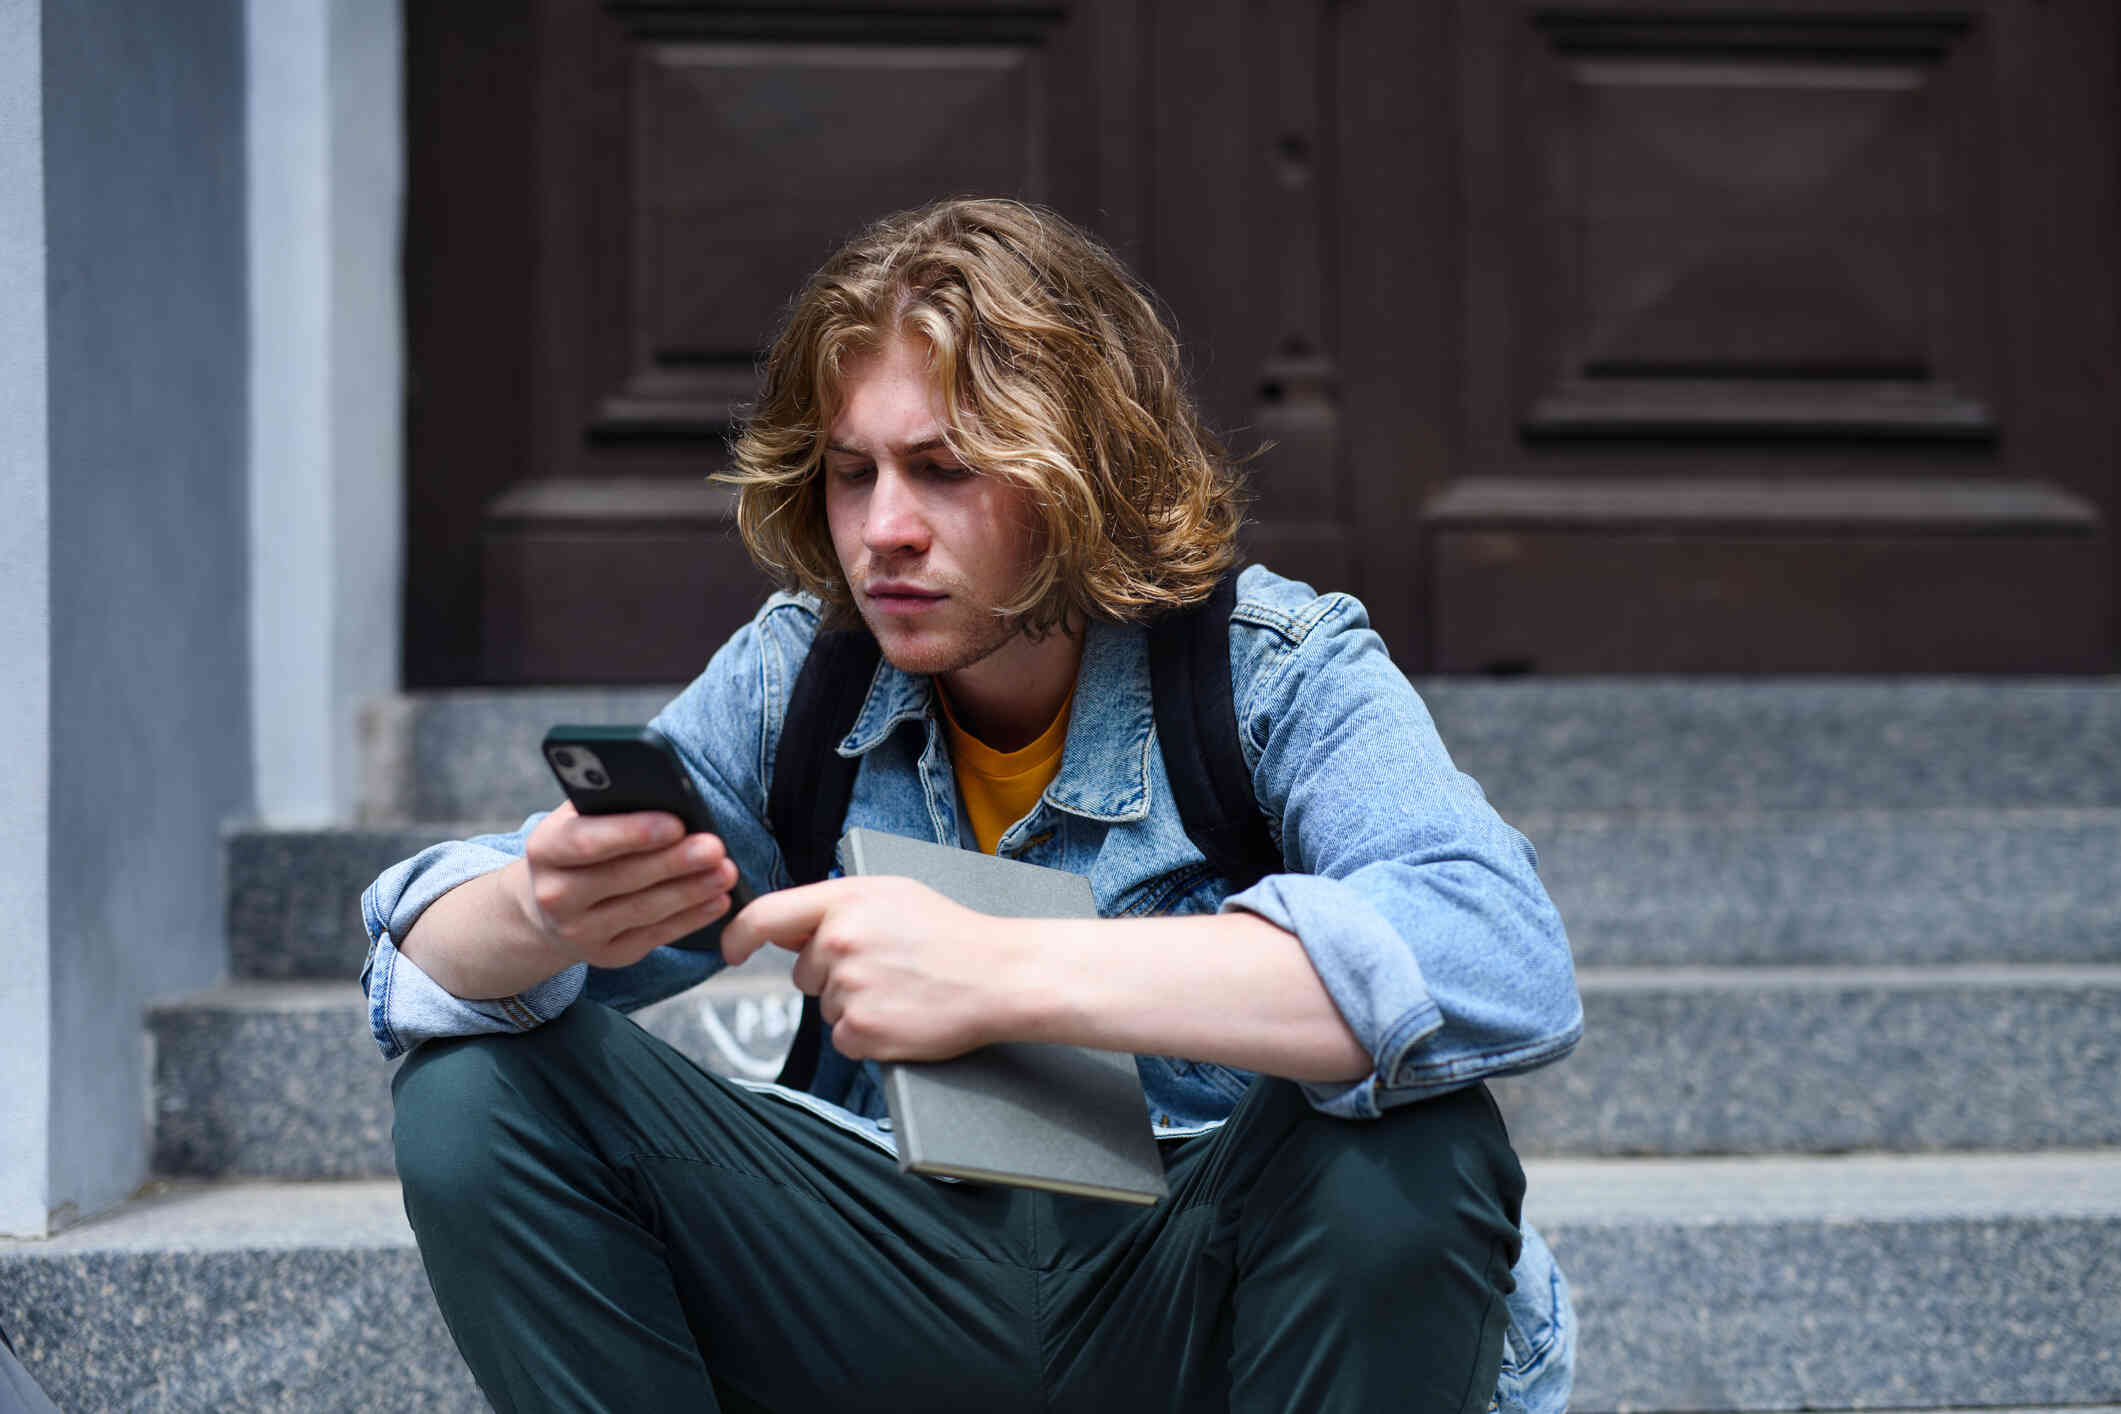 A man in a jean jacket and bakc pack sits on a cement step outside and looks at the cellphone in his hand.